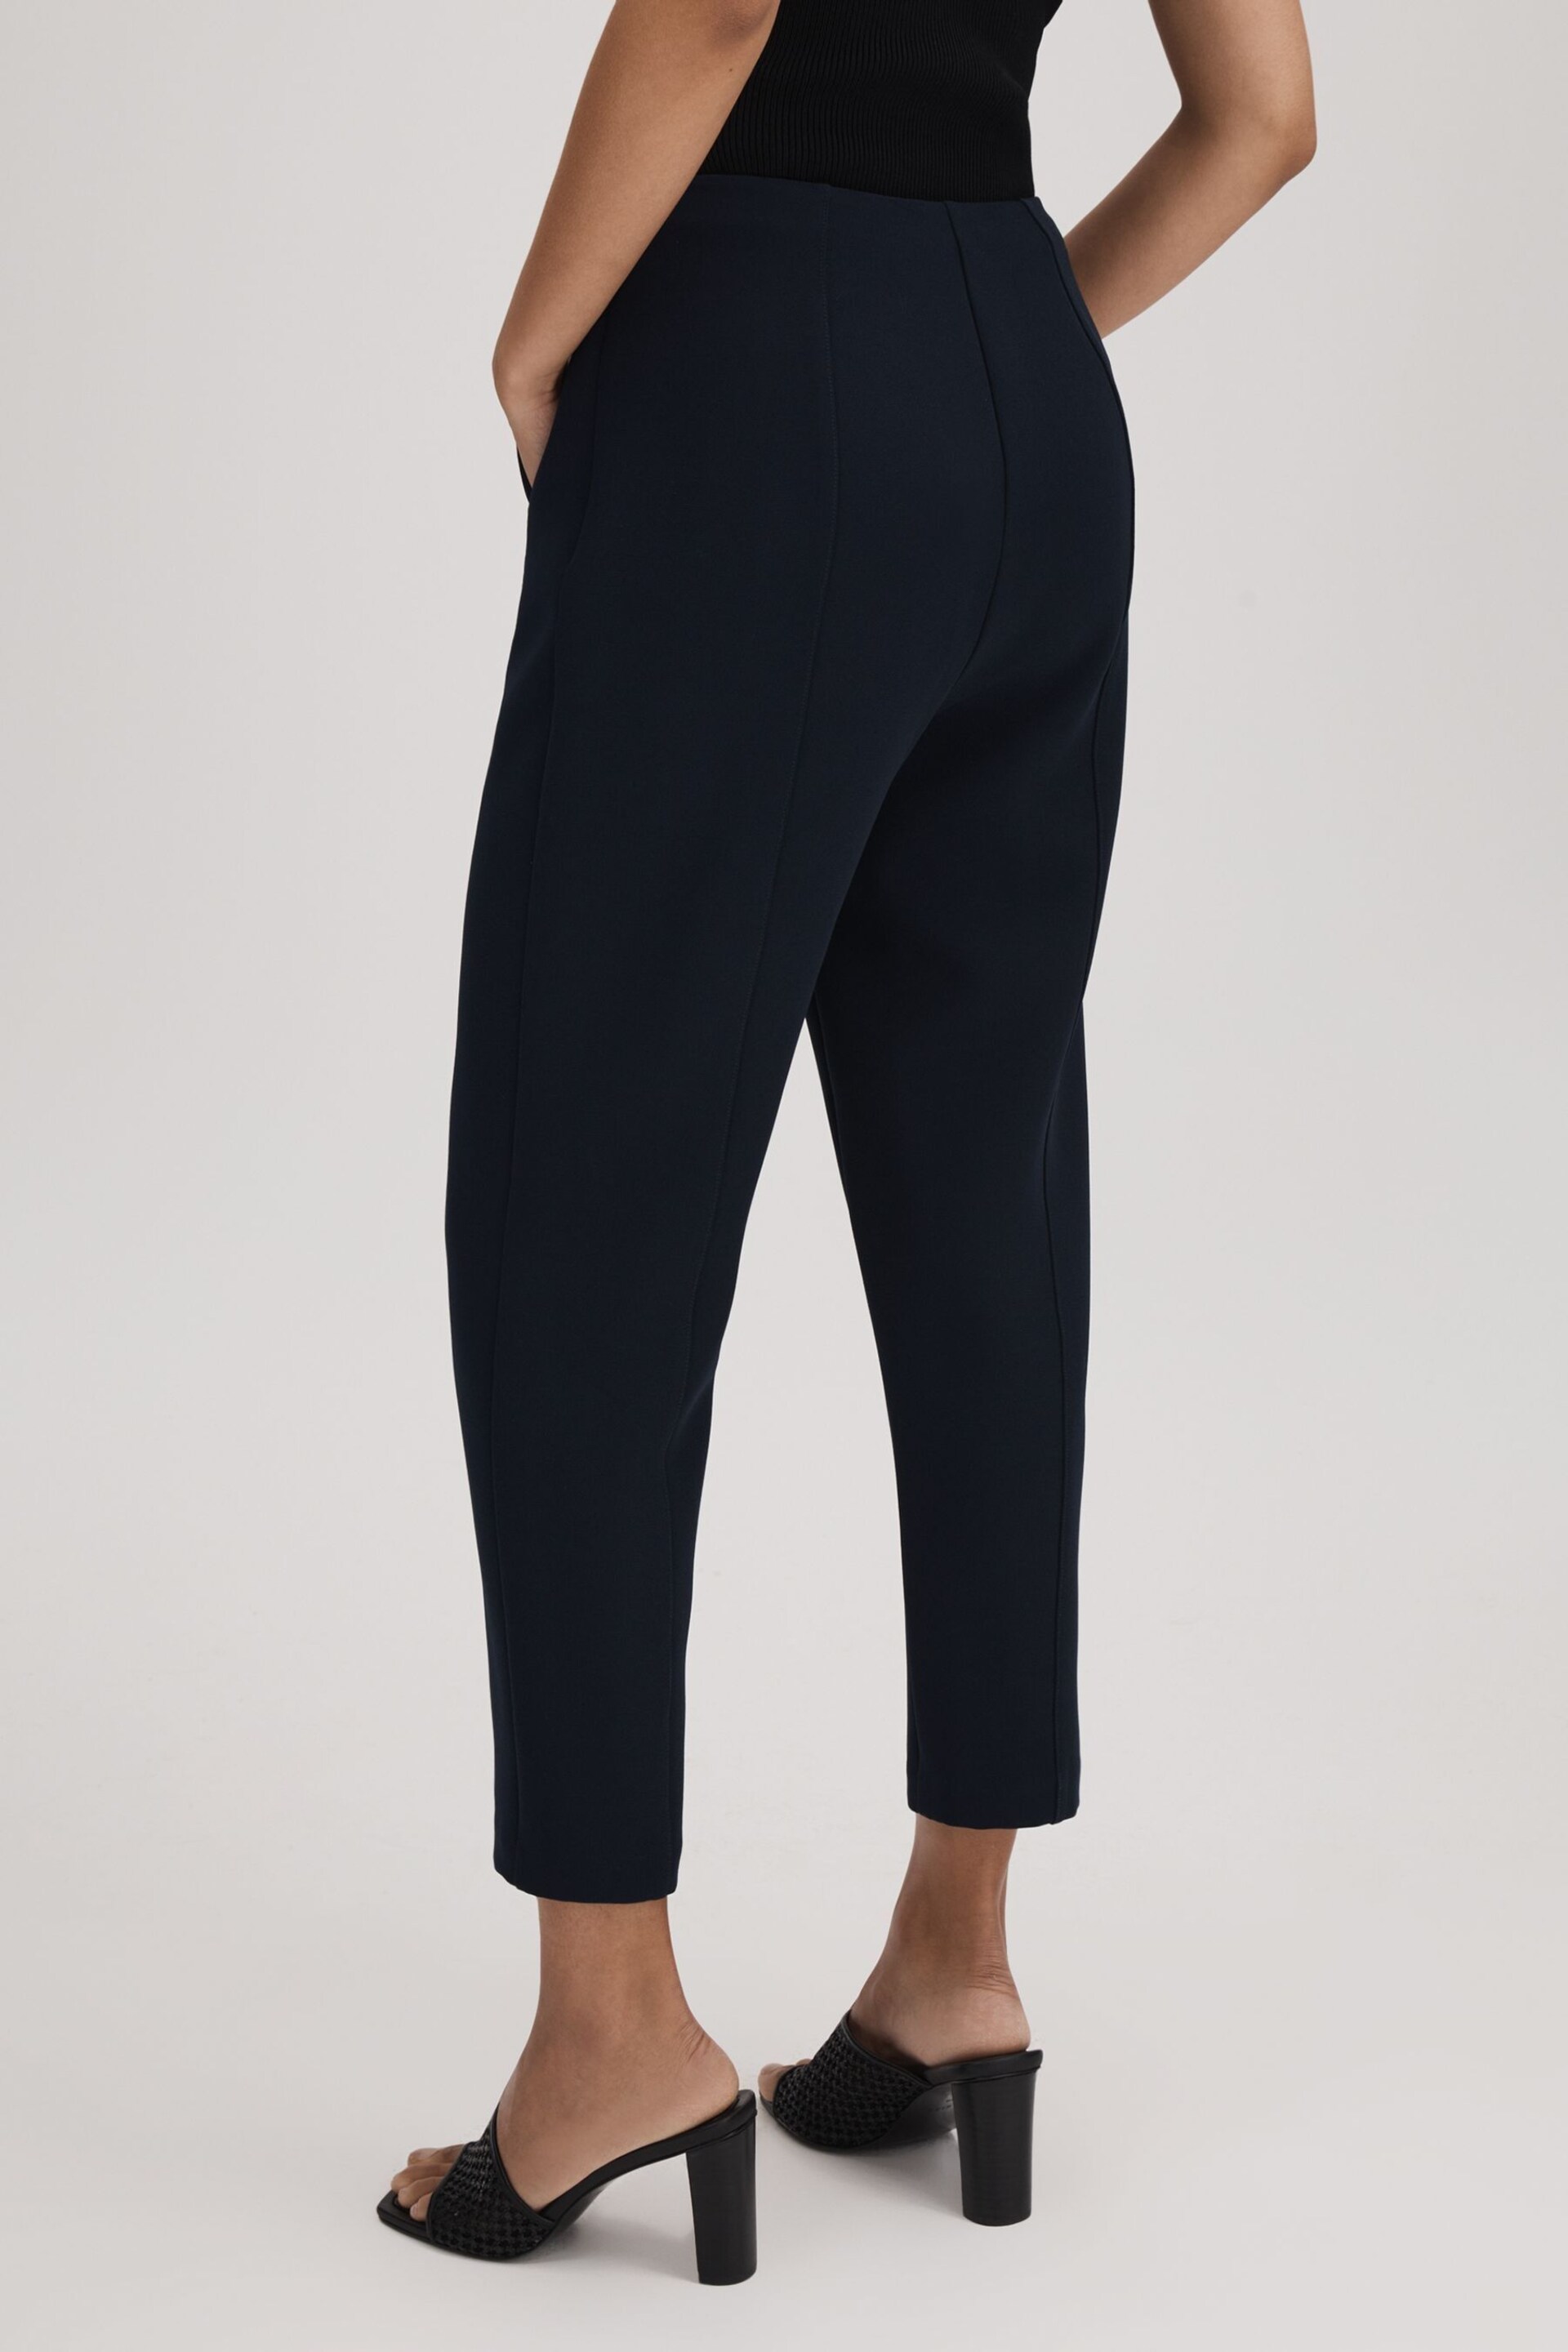 Florere Slim Fit Trousers - Image 5 of 6